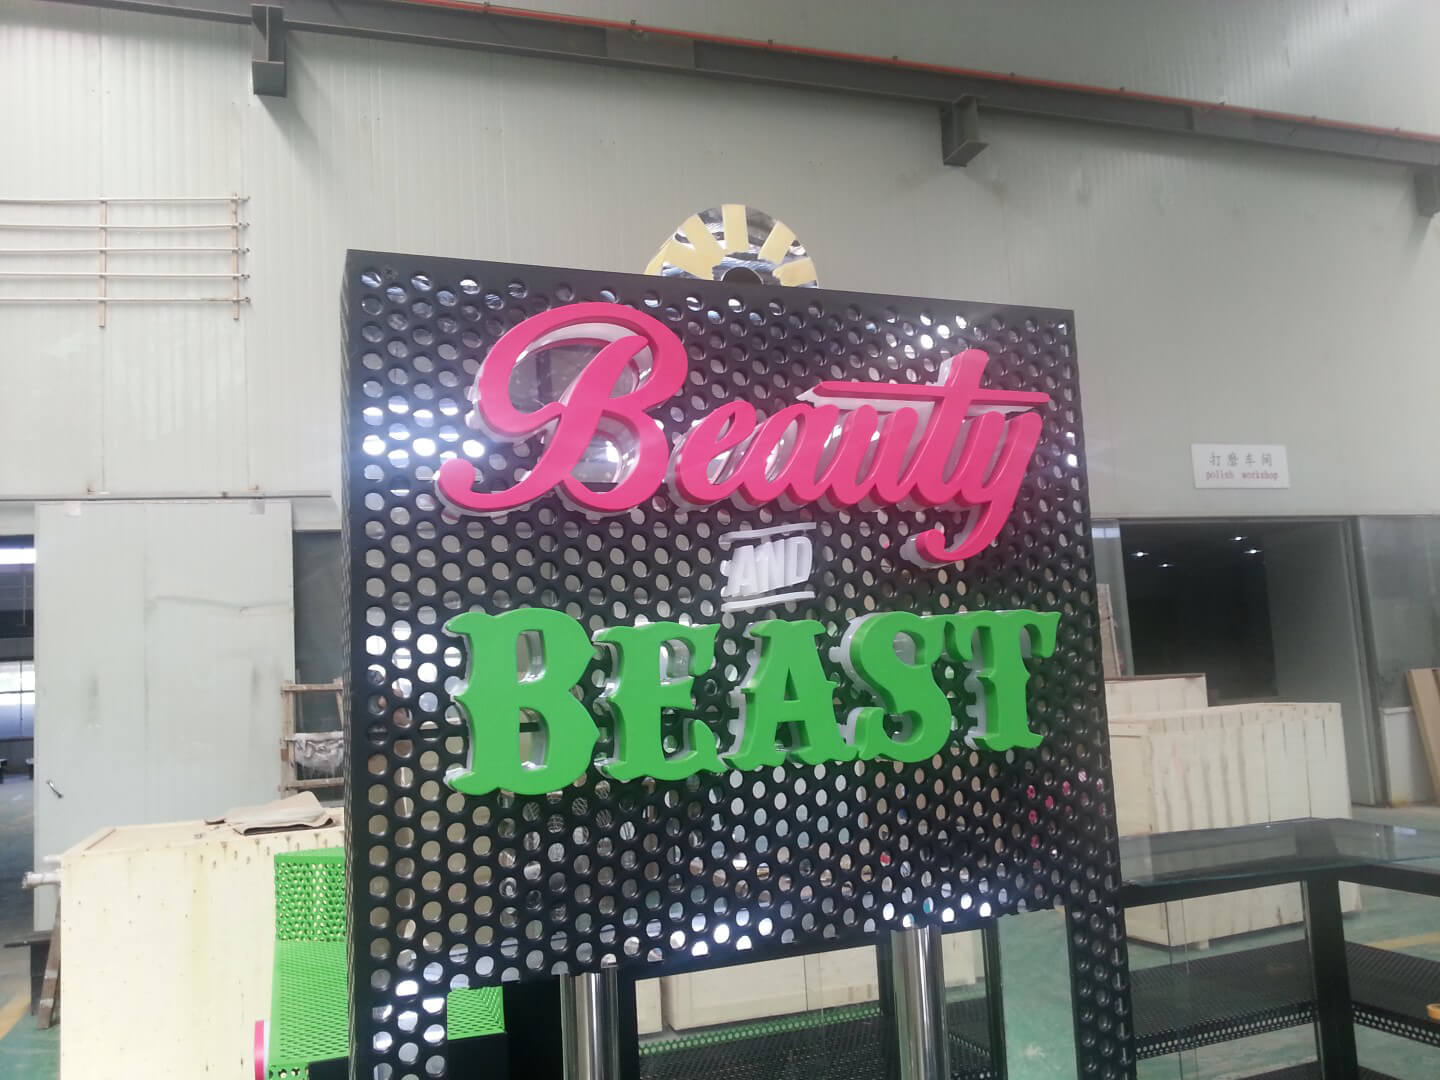 Beauty and beast kiosk in warehouse.